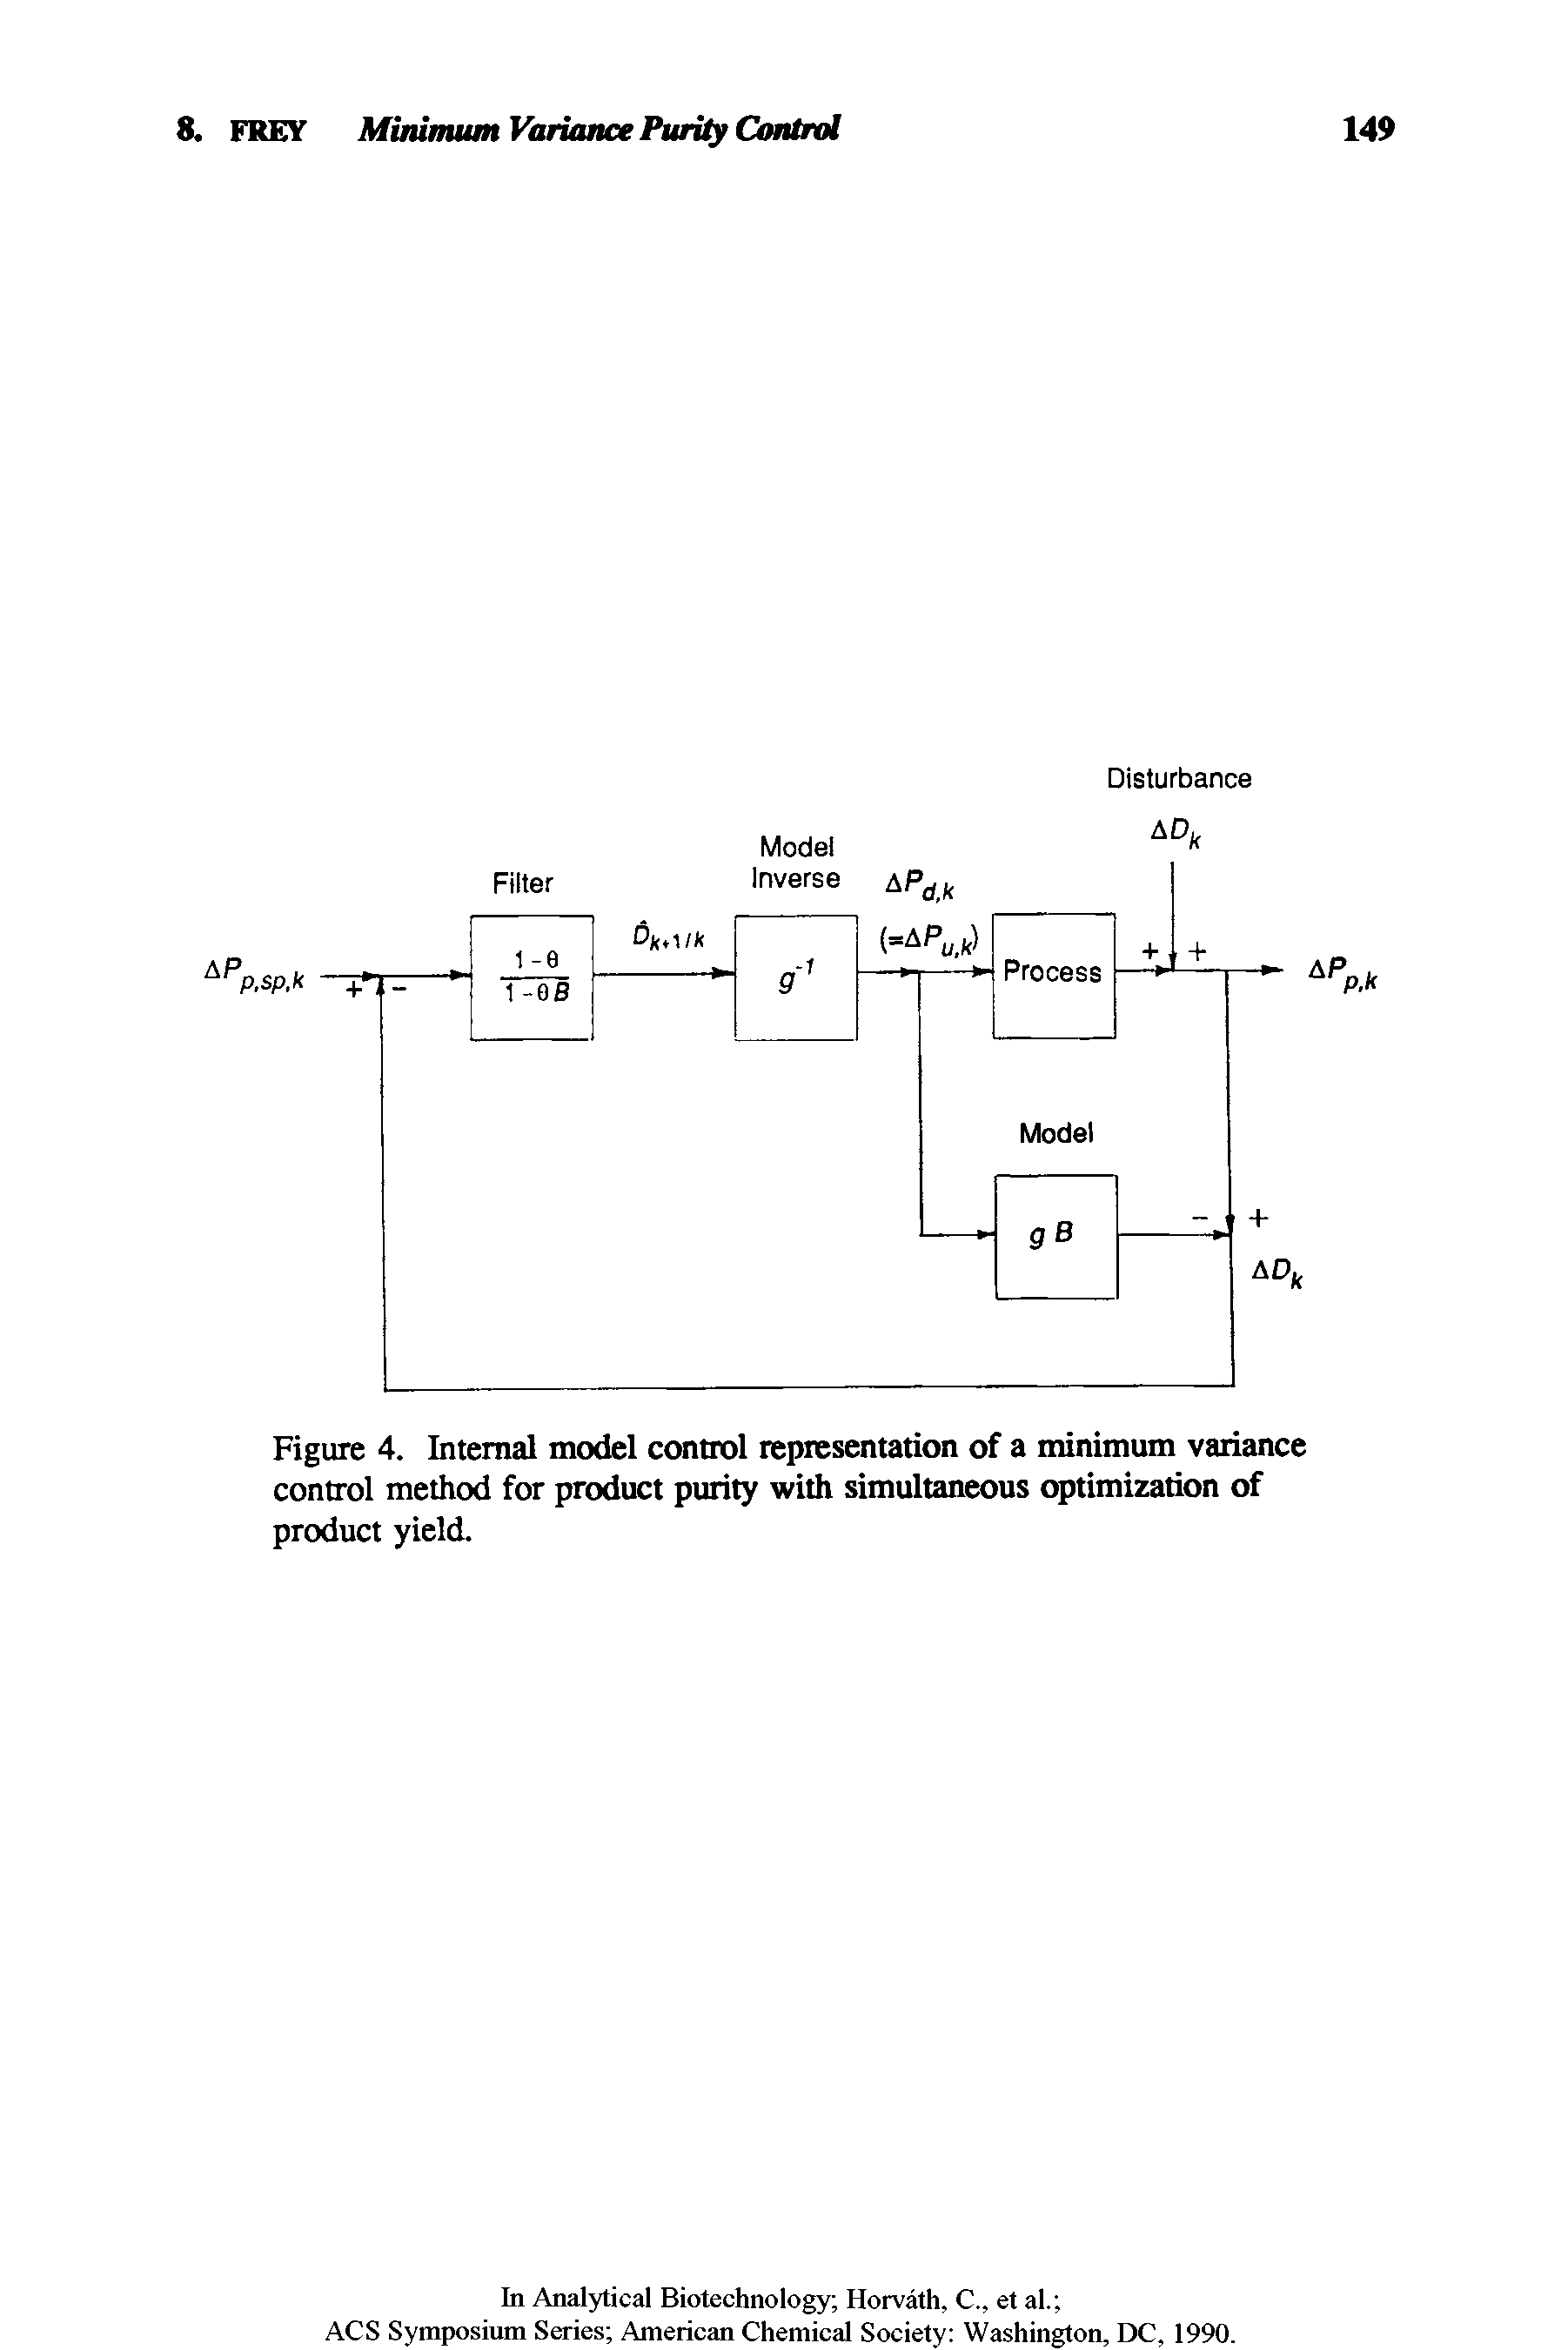 Figure 4. Internal model control representation of a minimum variance control method for product purity with simultaneous optimization of product yield.